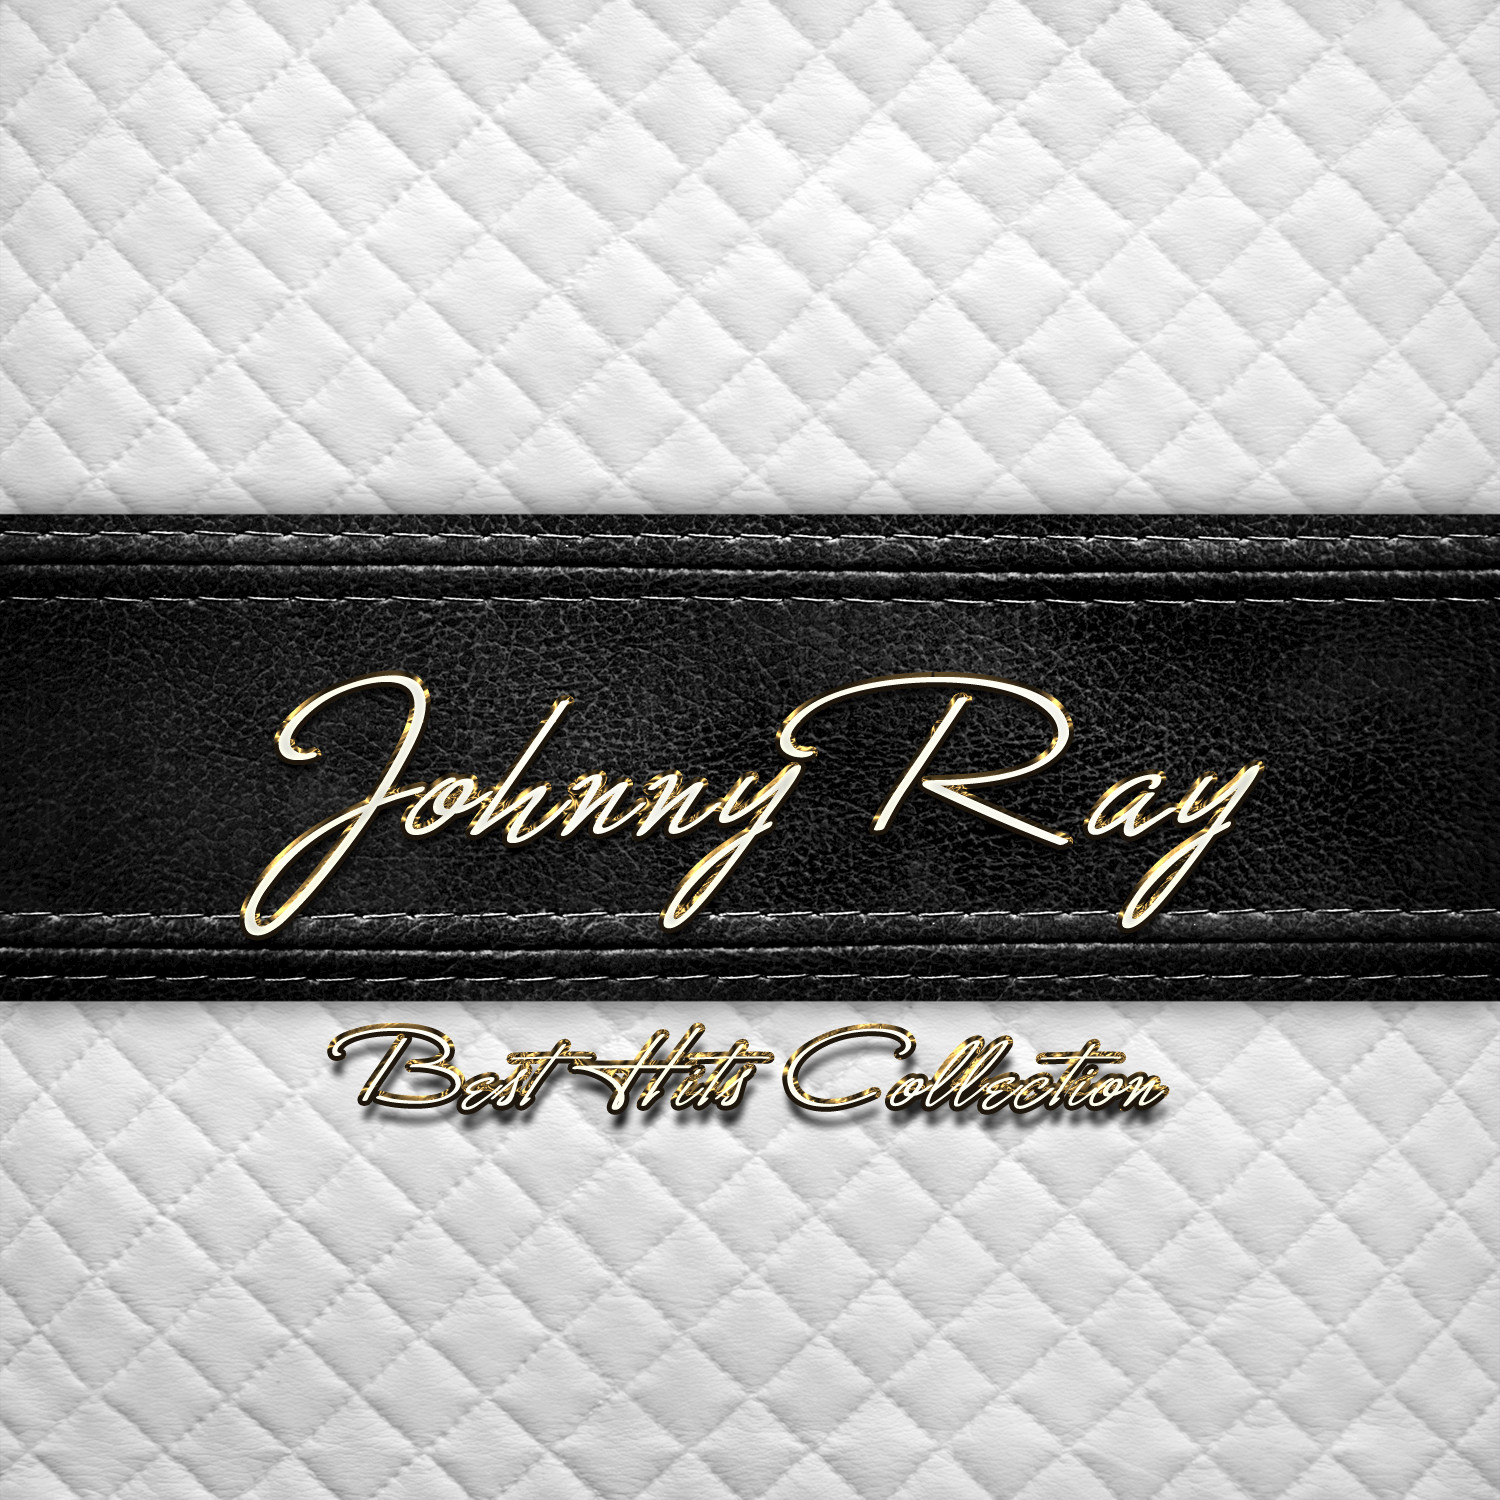 Best Hits Collection of Johnny Ray